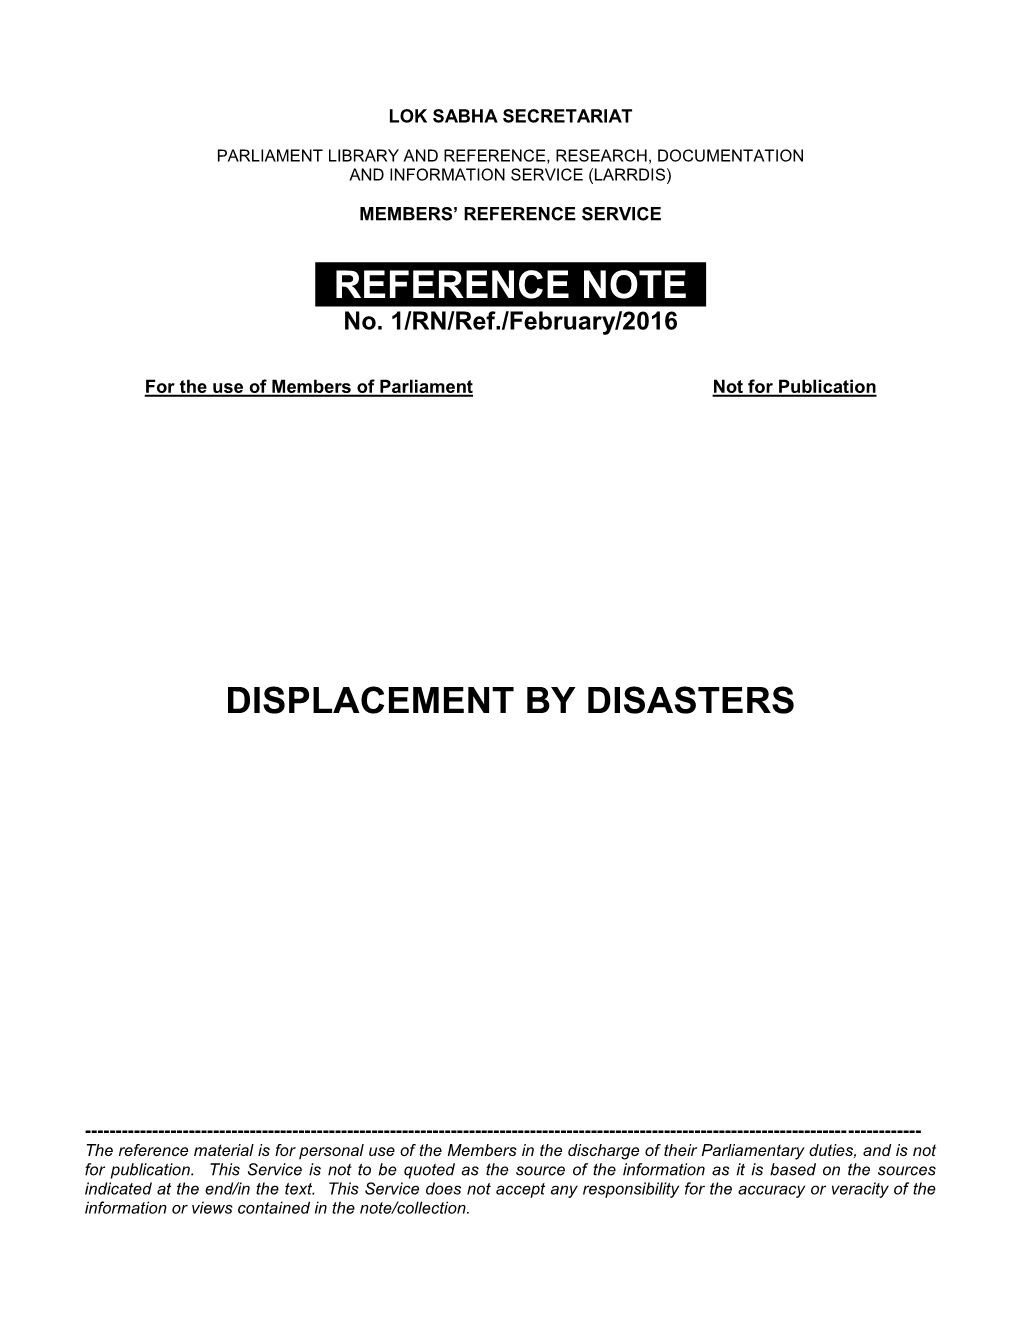 Displacement by Disasters